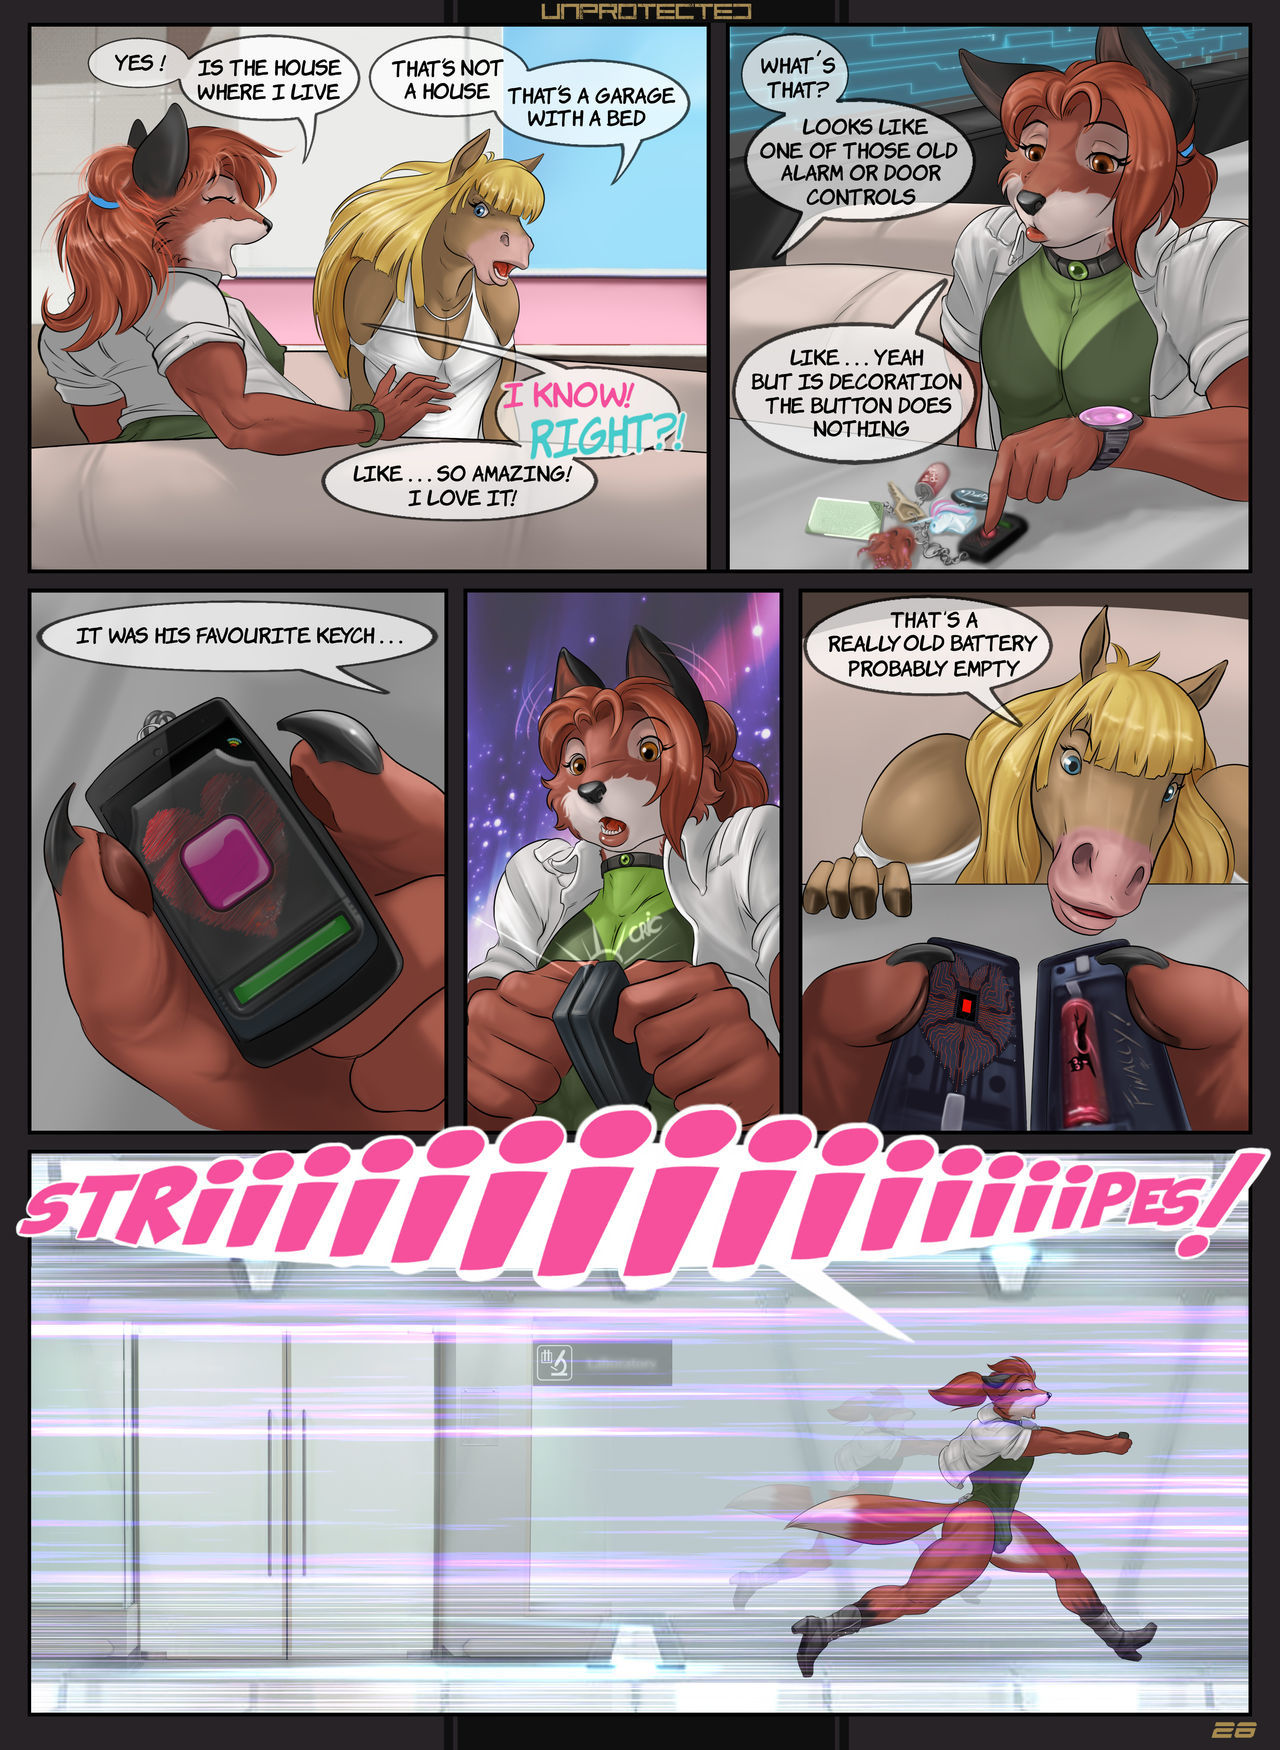 Unprotected Part 2 Zorro Re page 29